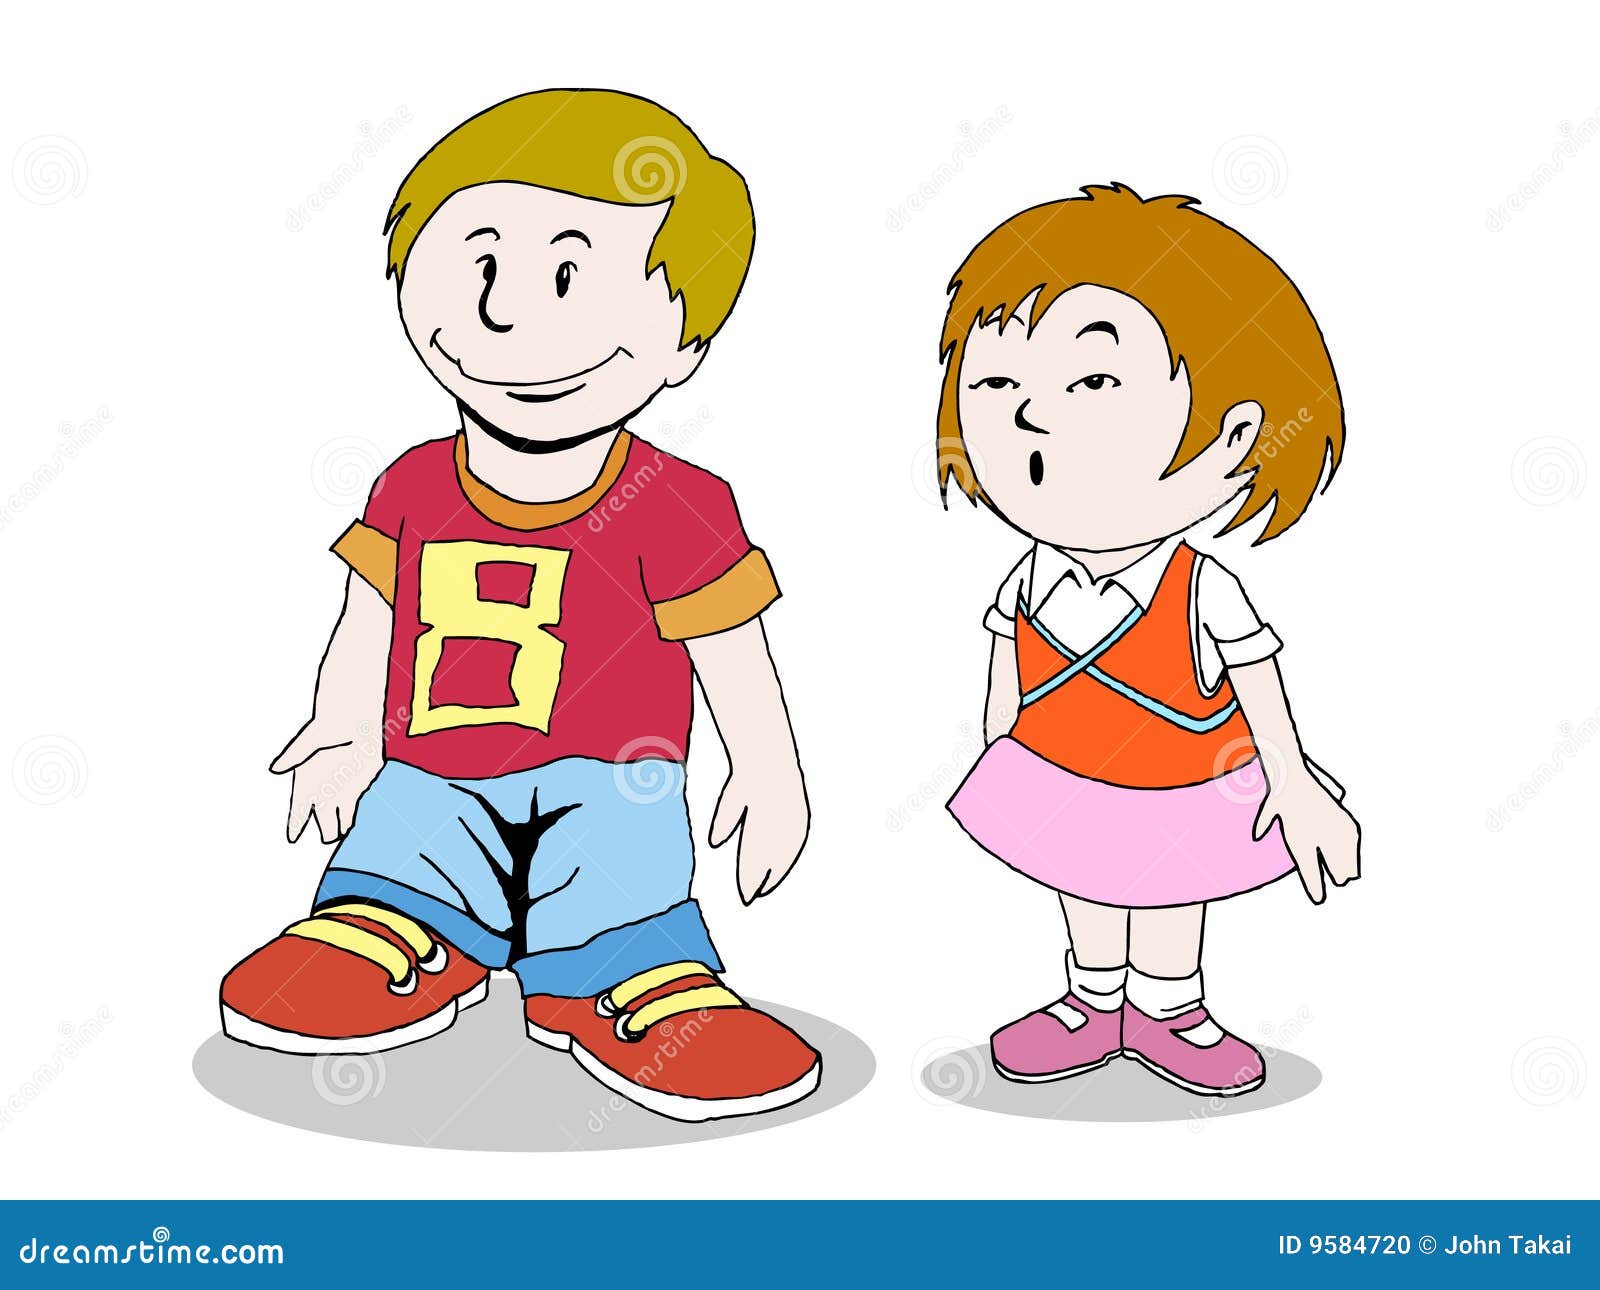 clipart boy and girl talking - photo #45